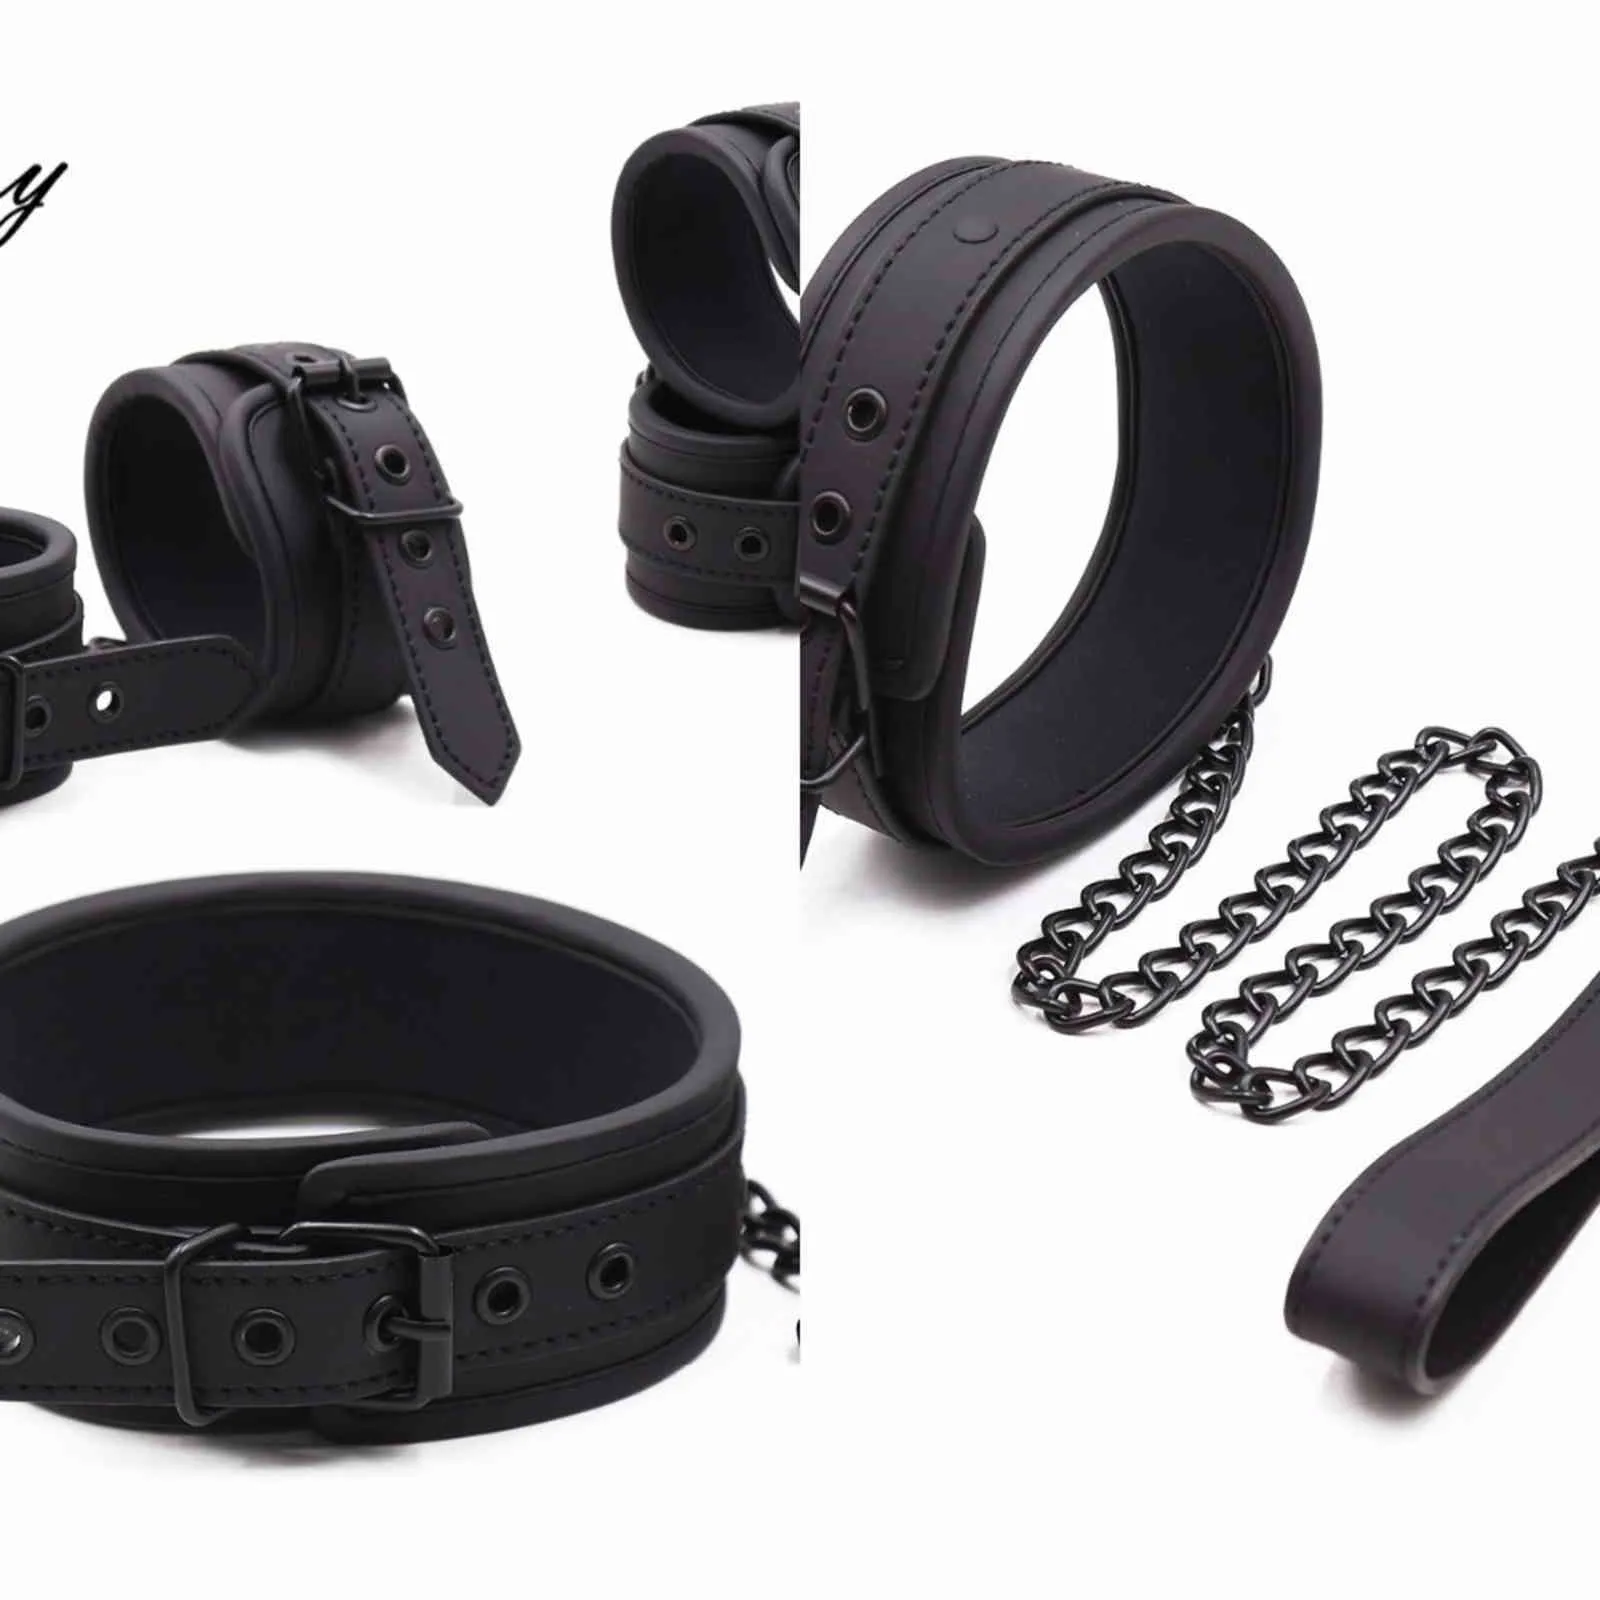 NXY Adult toys Thierry PU Leather SM Products Wrist Cuffs & Ankle Neck Collar Set BDSM Bondage Sex Hancuffs Cosplay Accessories 1130